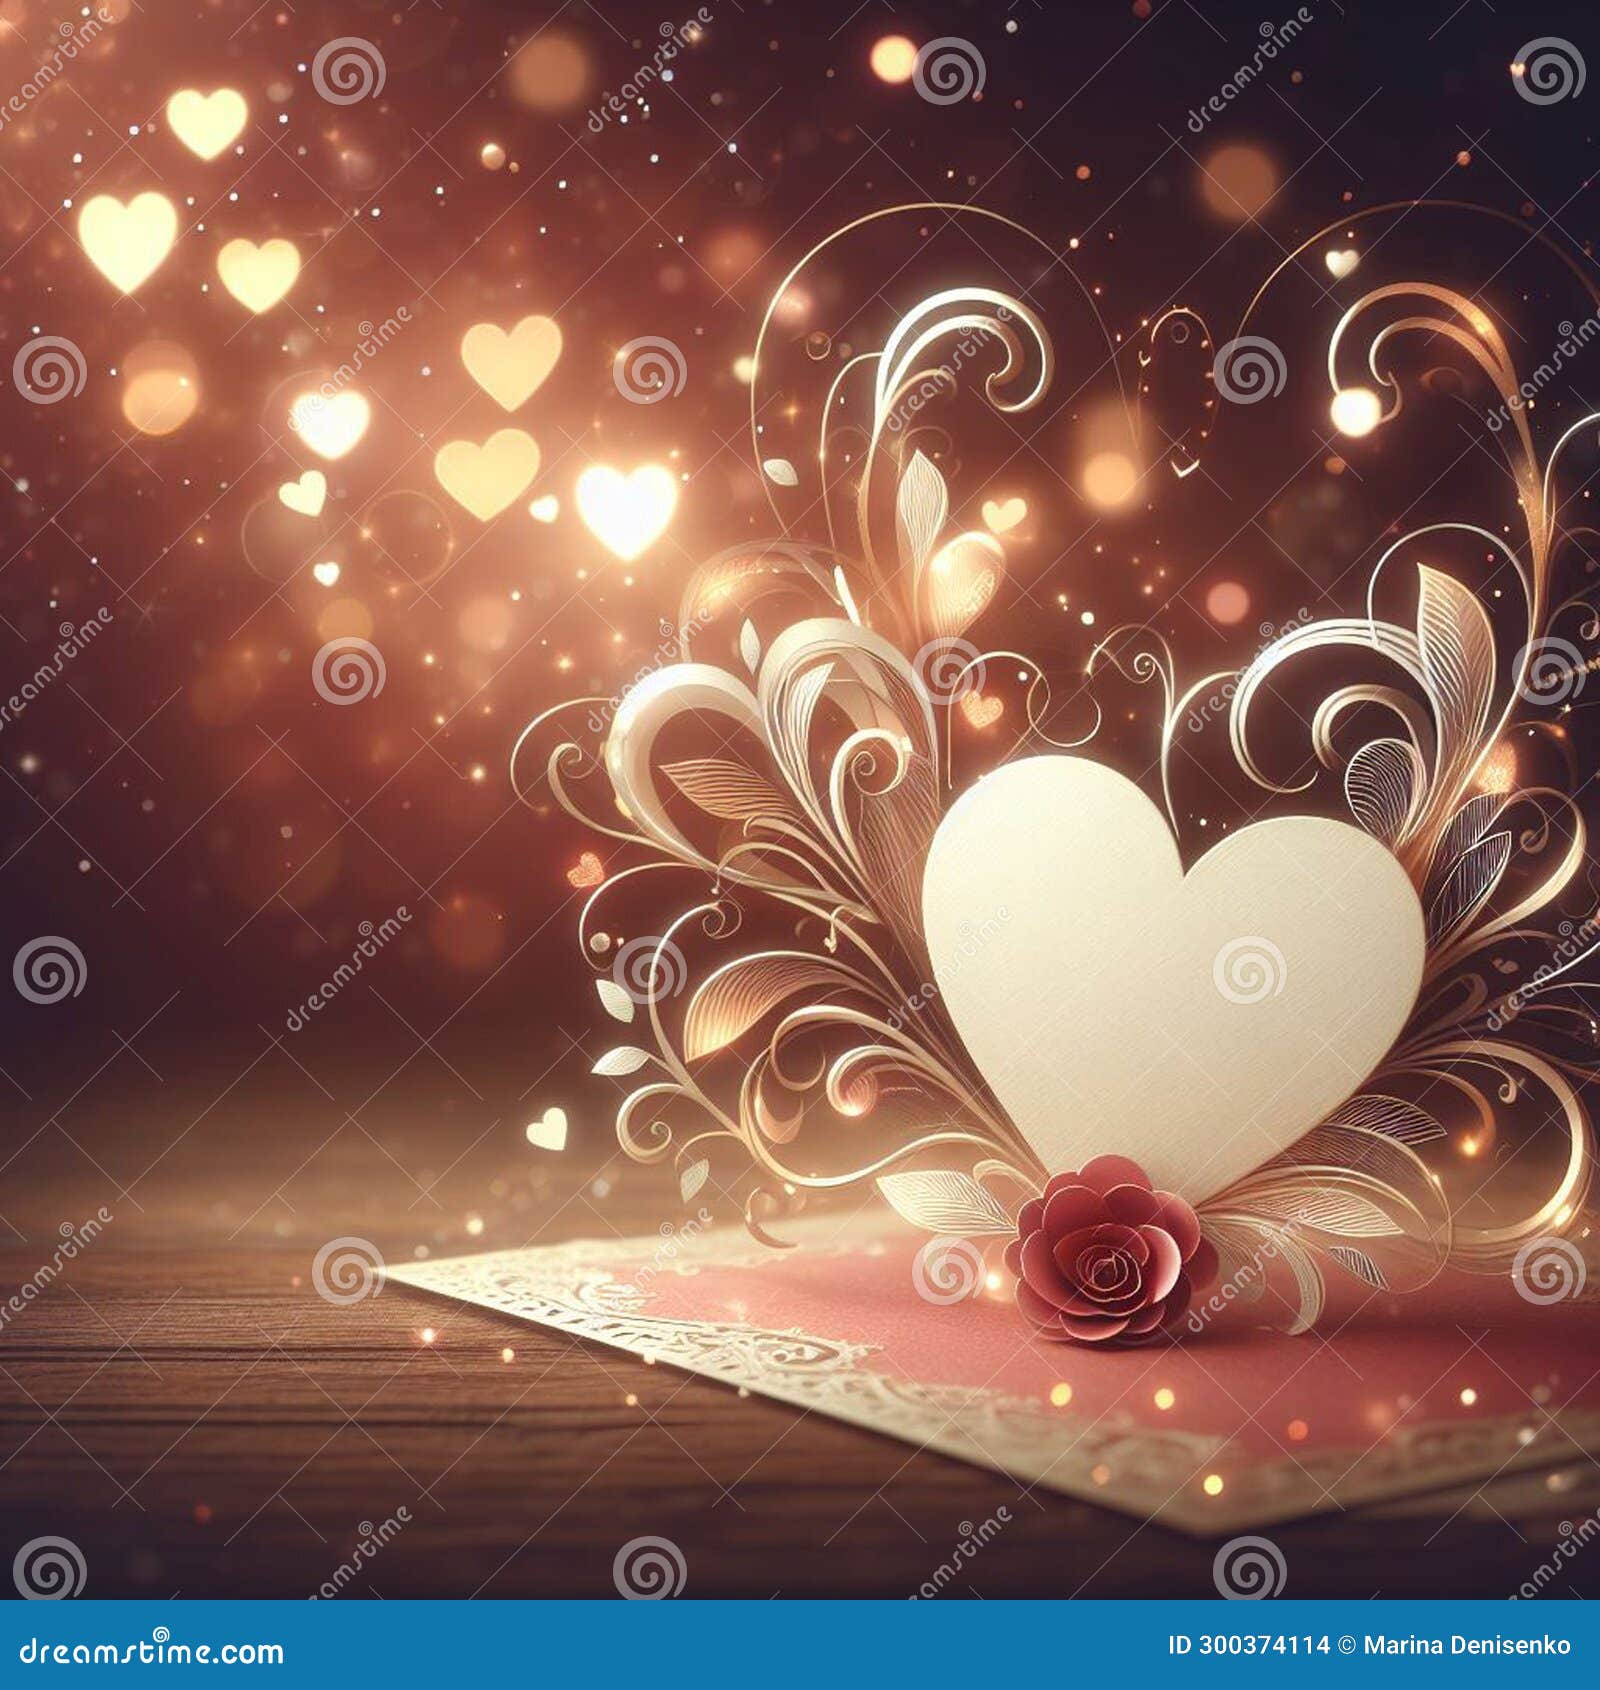 valentine-s-day-background-with-festive-decor-elements-and-bokeh-effect-ideal-for-greeting